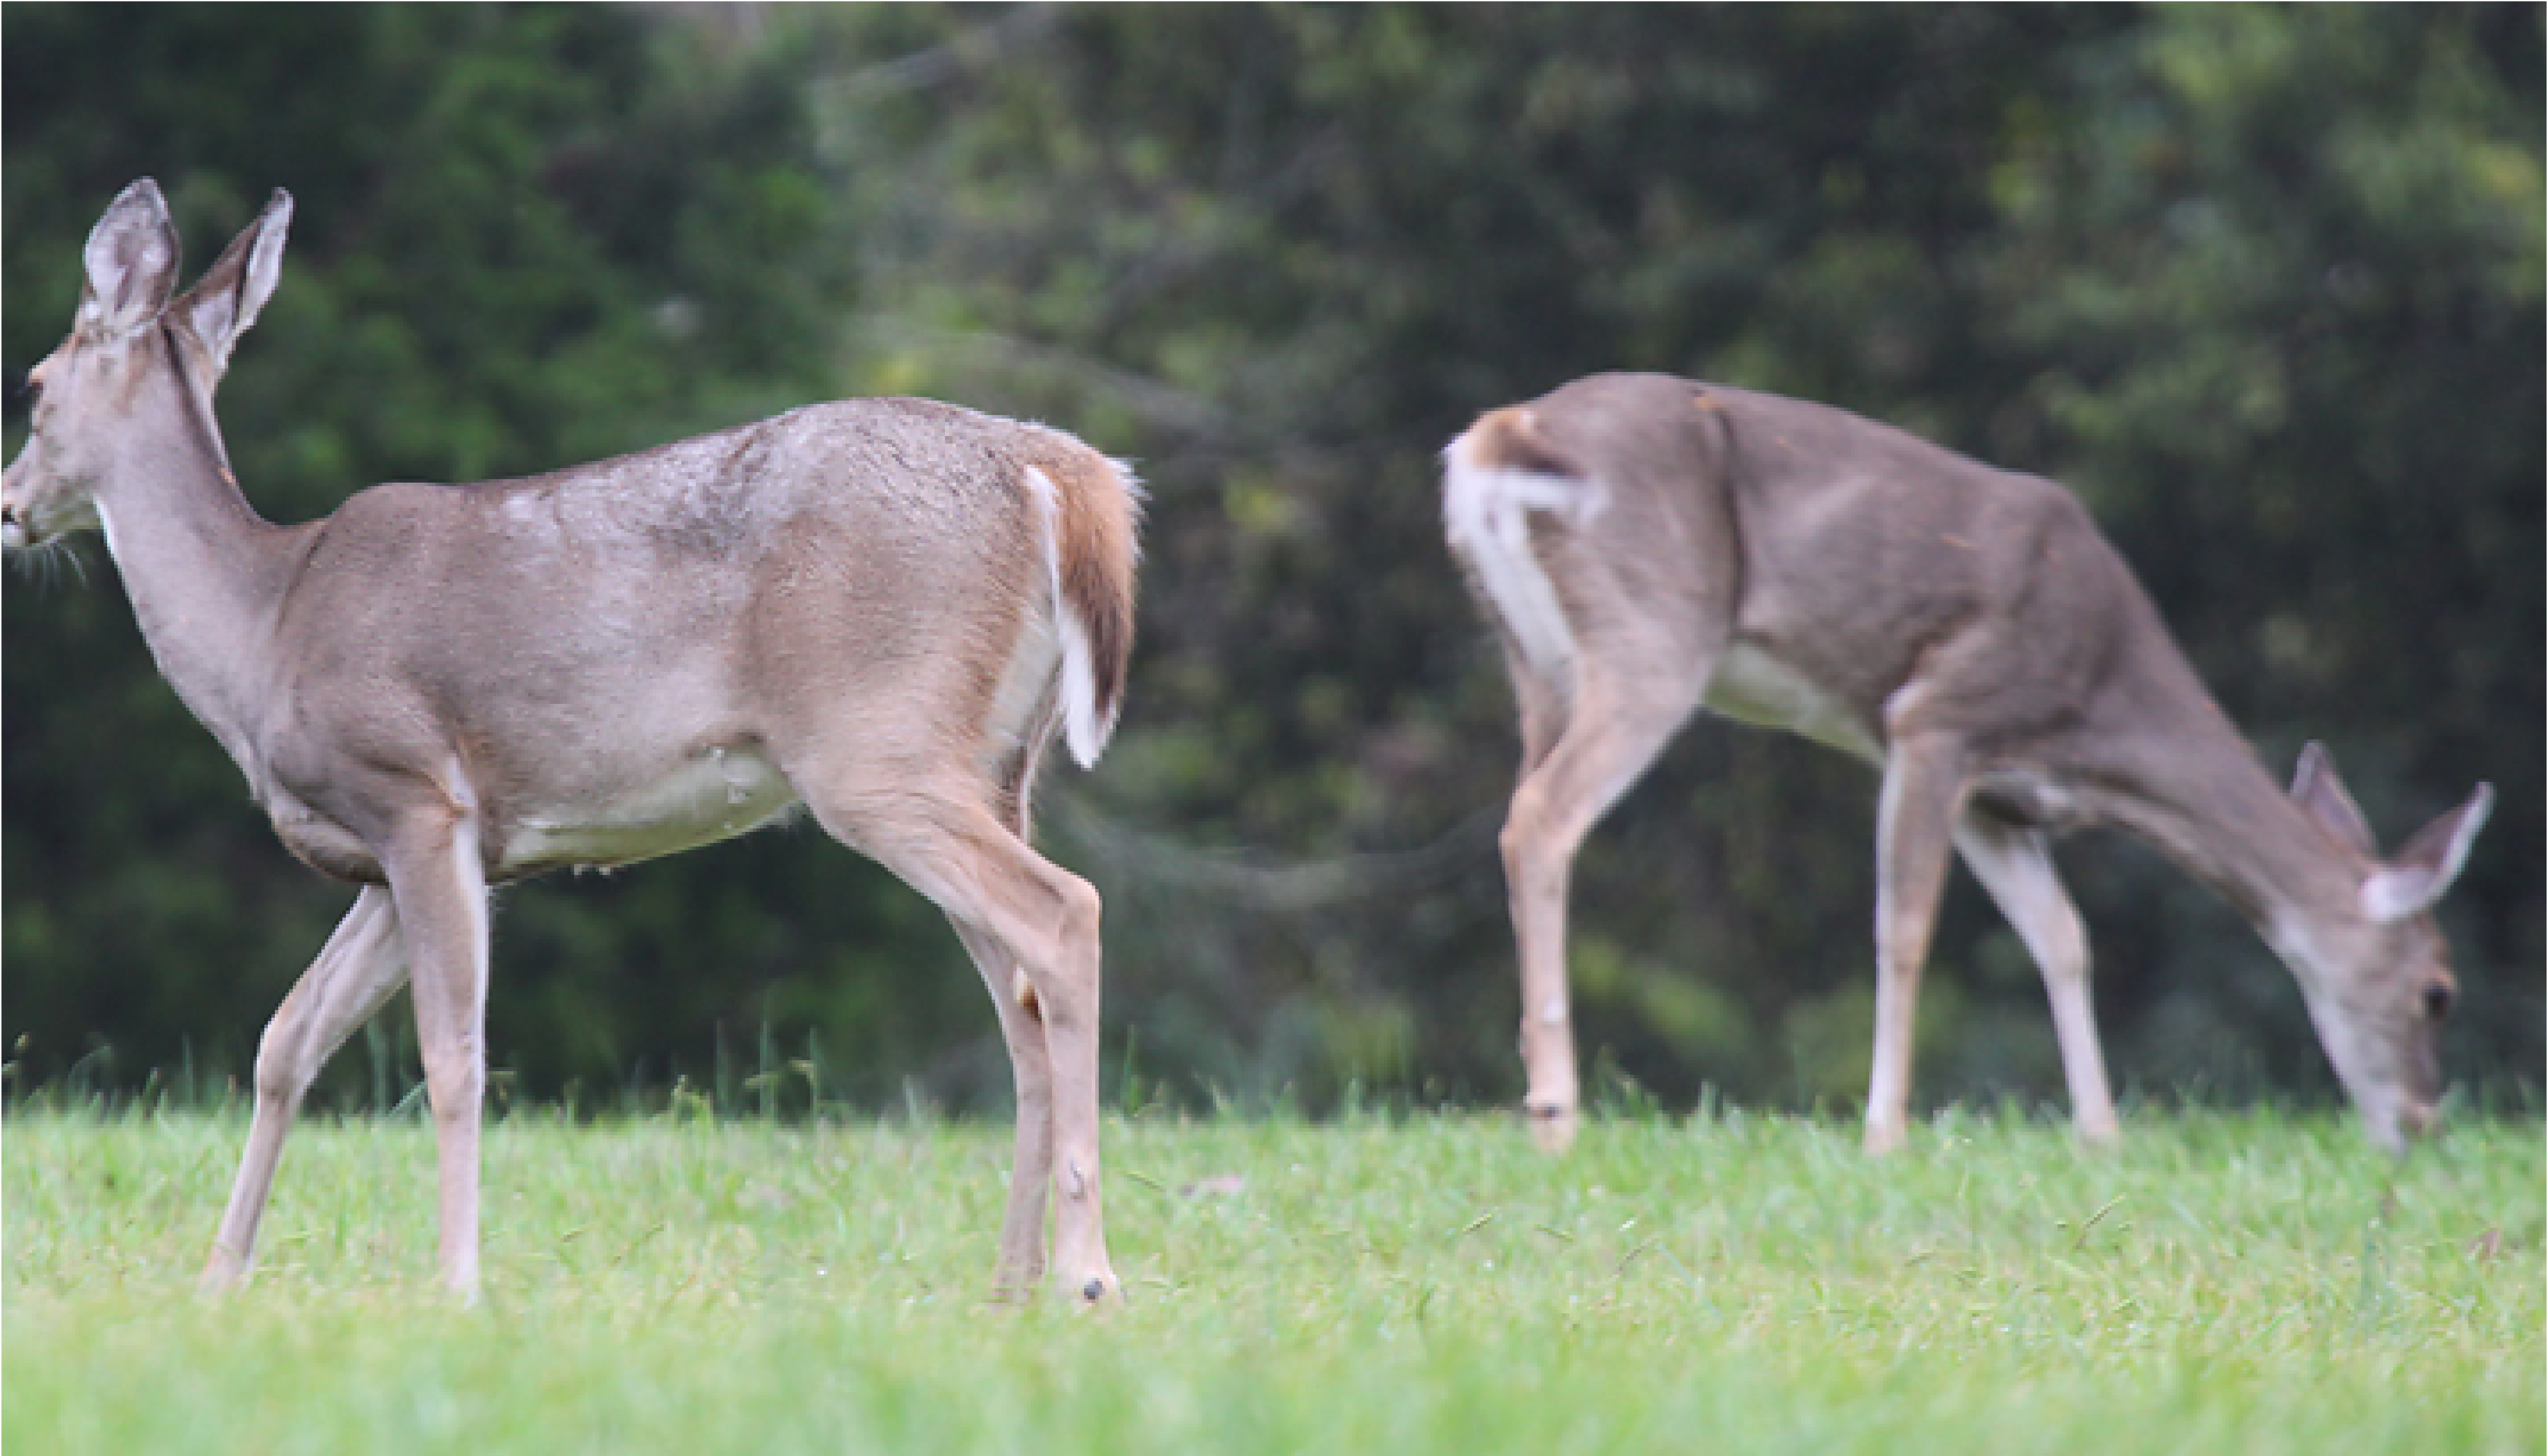 This photo shows two doe grazing